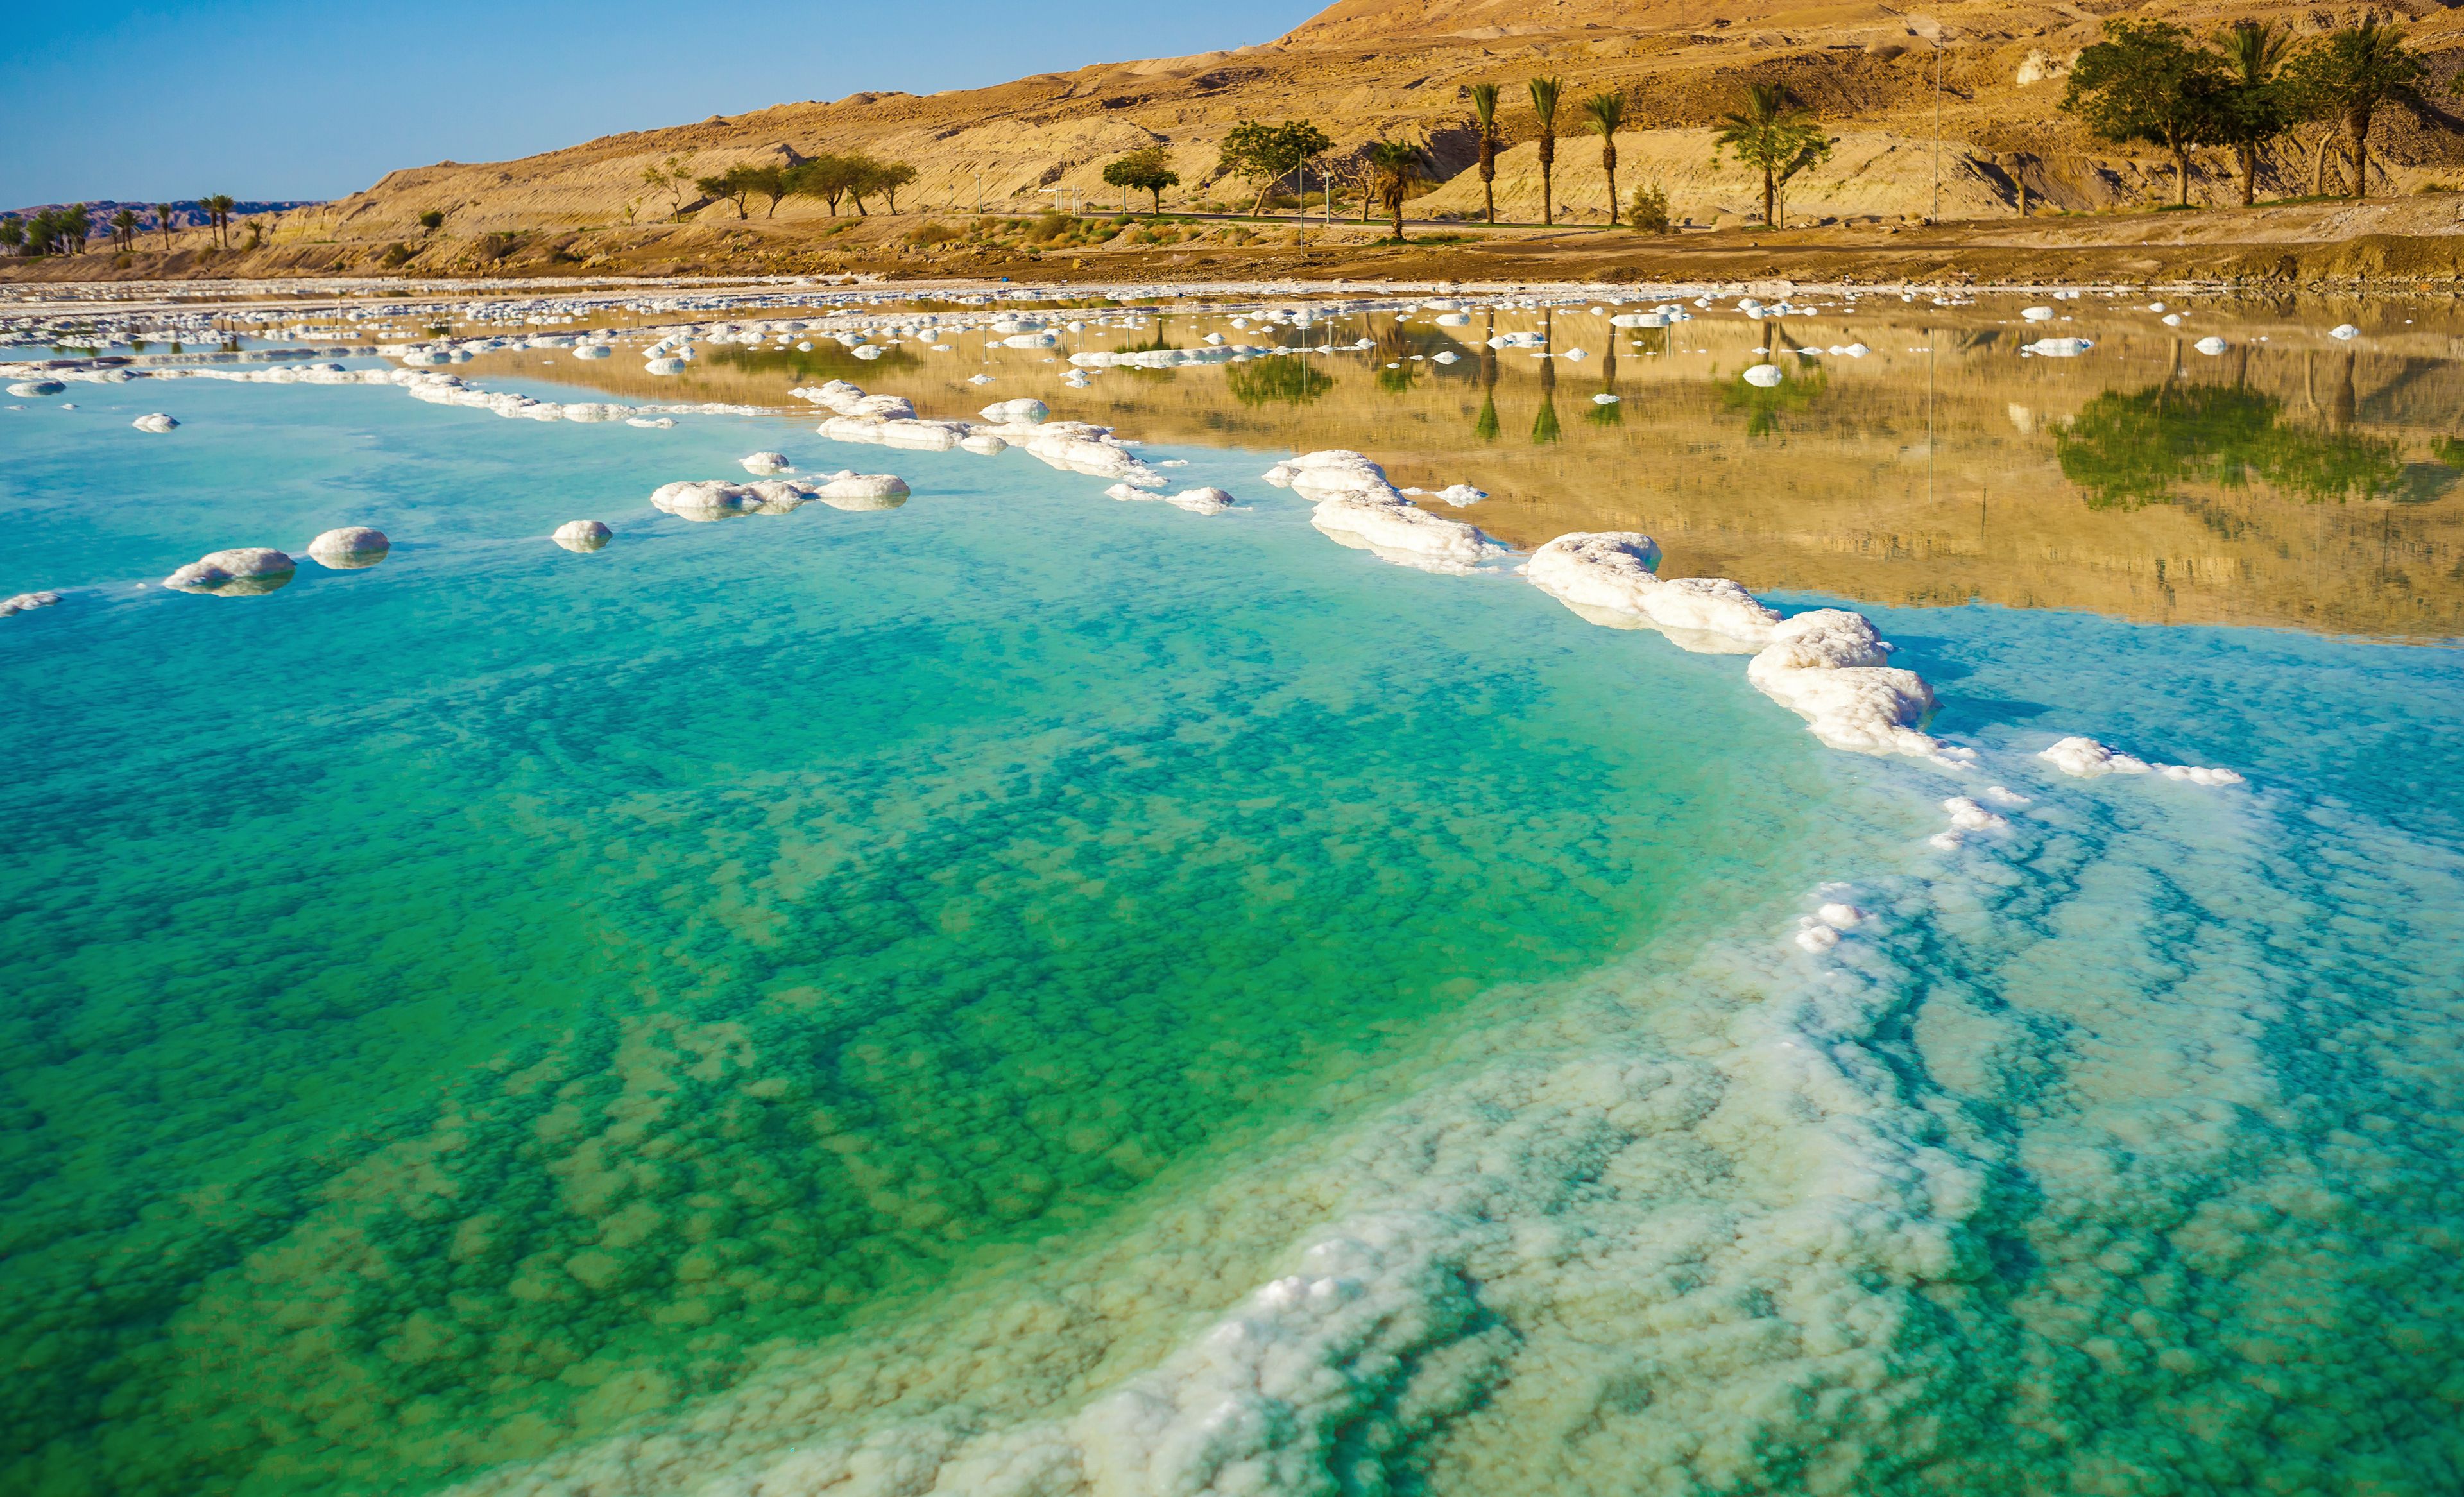 Healing therapies at the Dead Sea